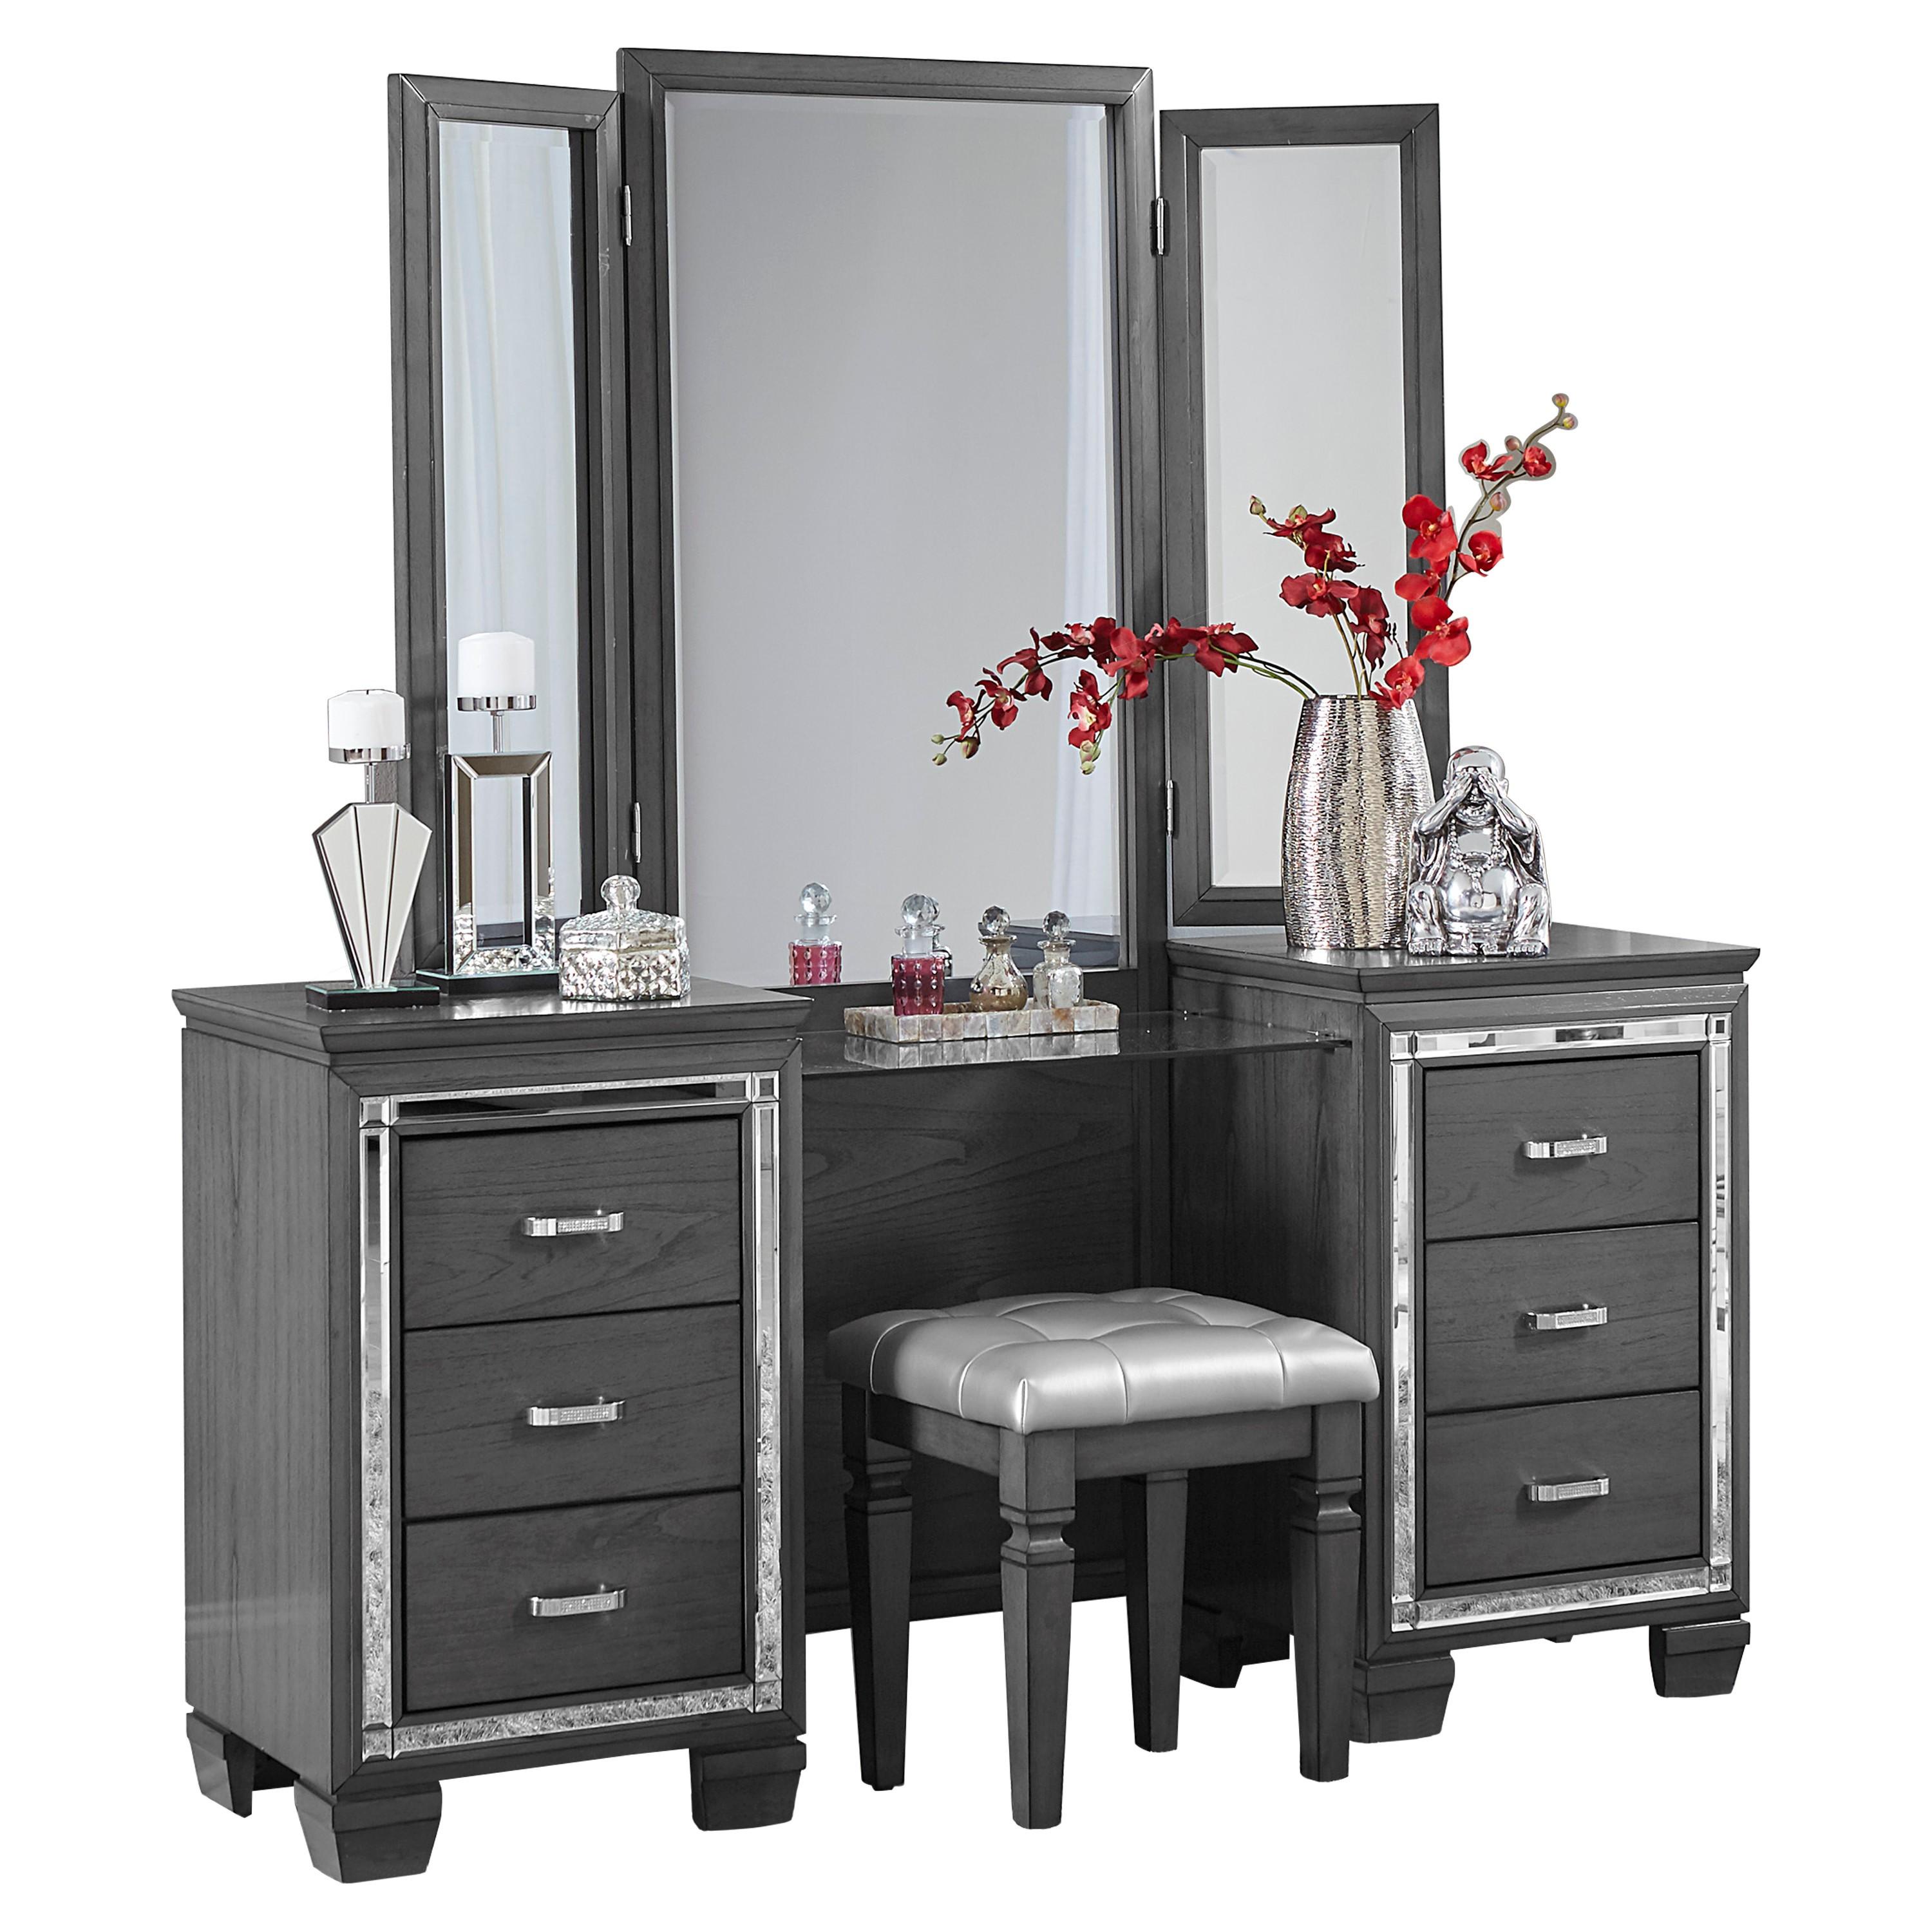 Modern Vanity Set 1916GY-14*15-3PC Allura 1916GY-14*15-3PC in Gray Faux Leather